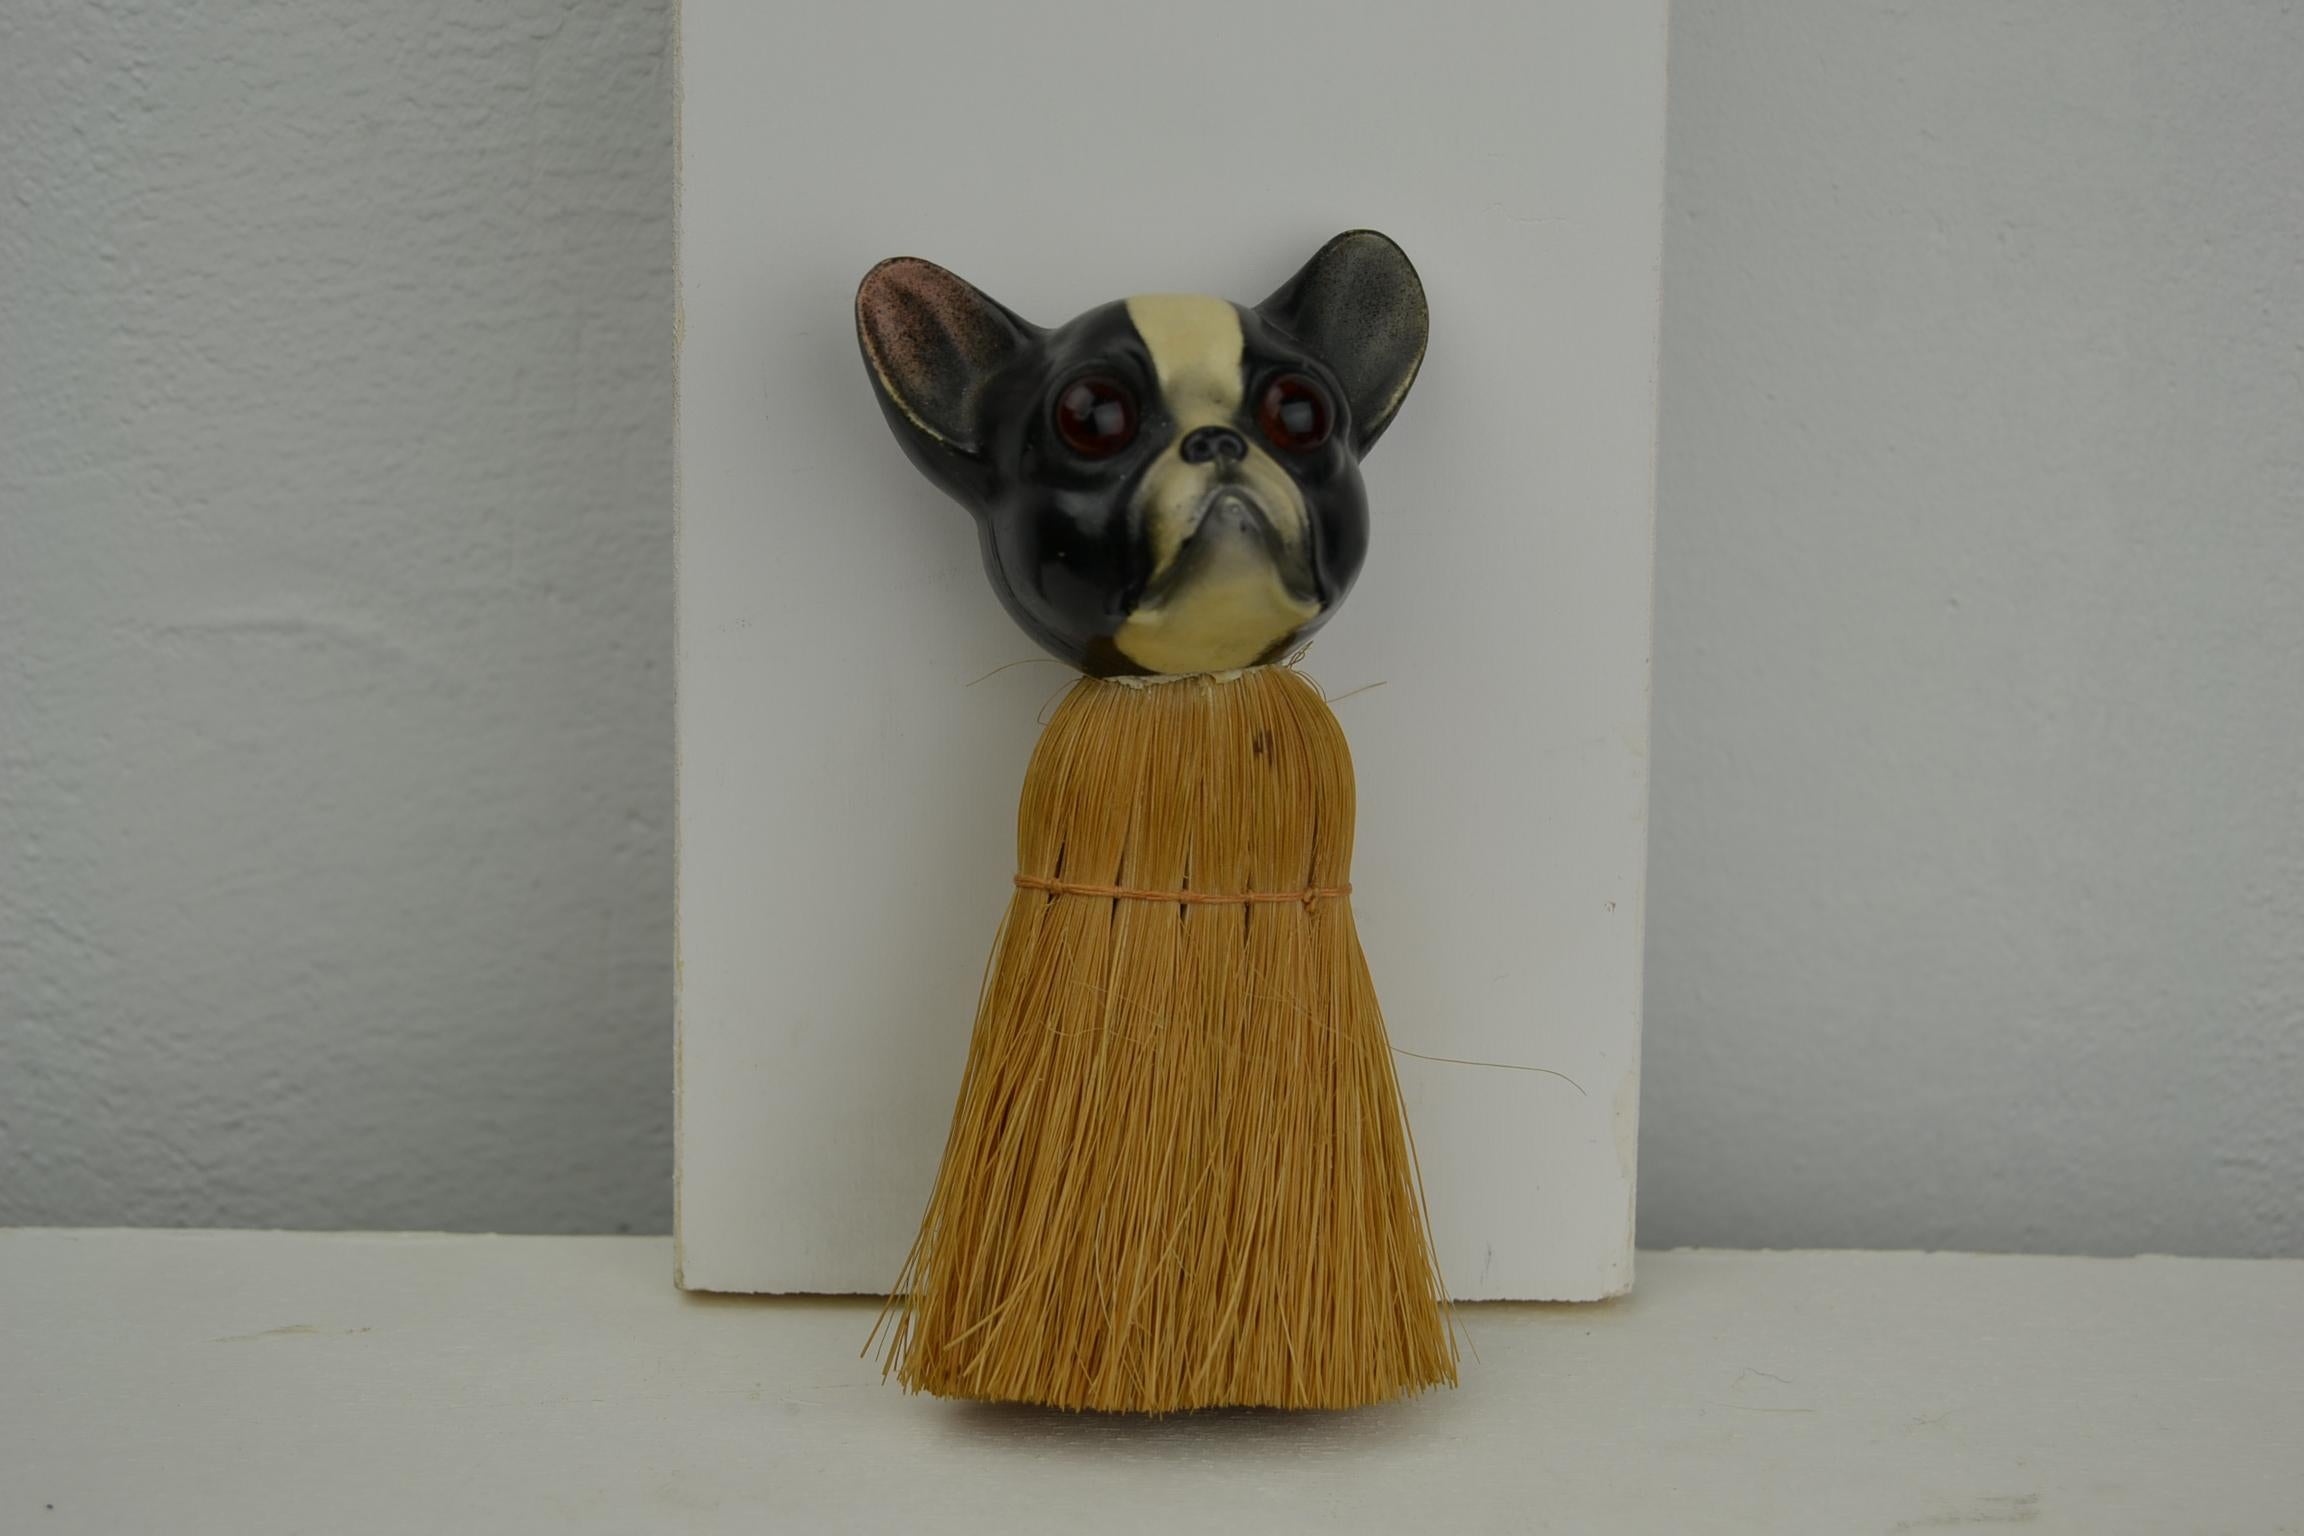 Art Deco French bulldog clothes brush, table brush, hand brush.
This cute antique brush has a hand painted head of a Frenchie. The dog's head is made of filled turtle shell, celluloid with plaster and has glass eyes. The brush or broom is made of